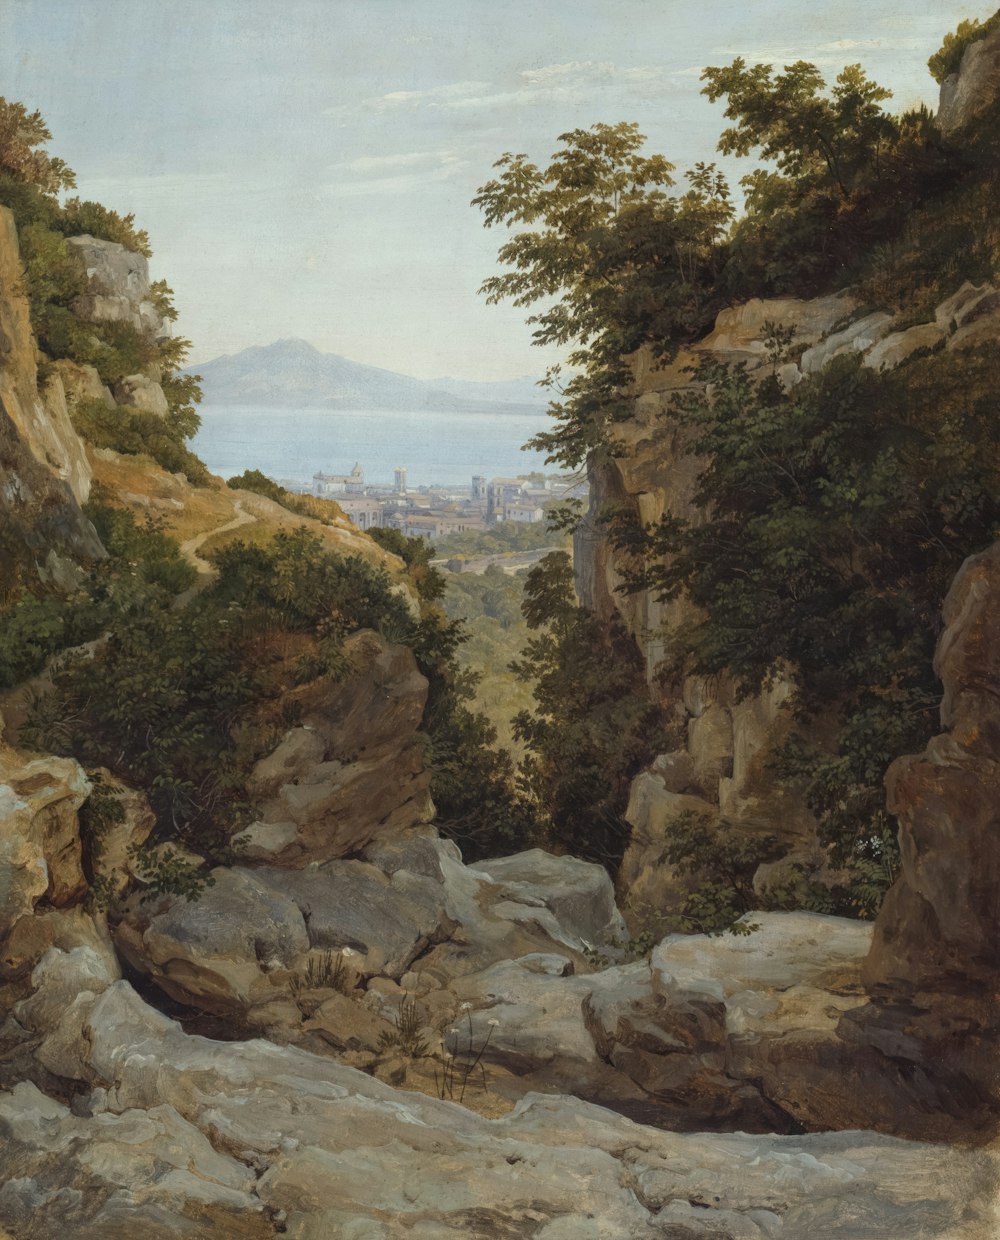 a painting of a rocky landscape with a city in the distance